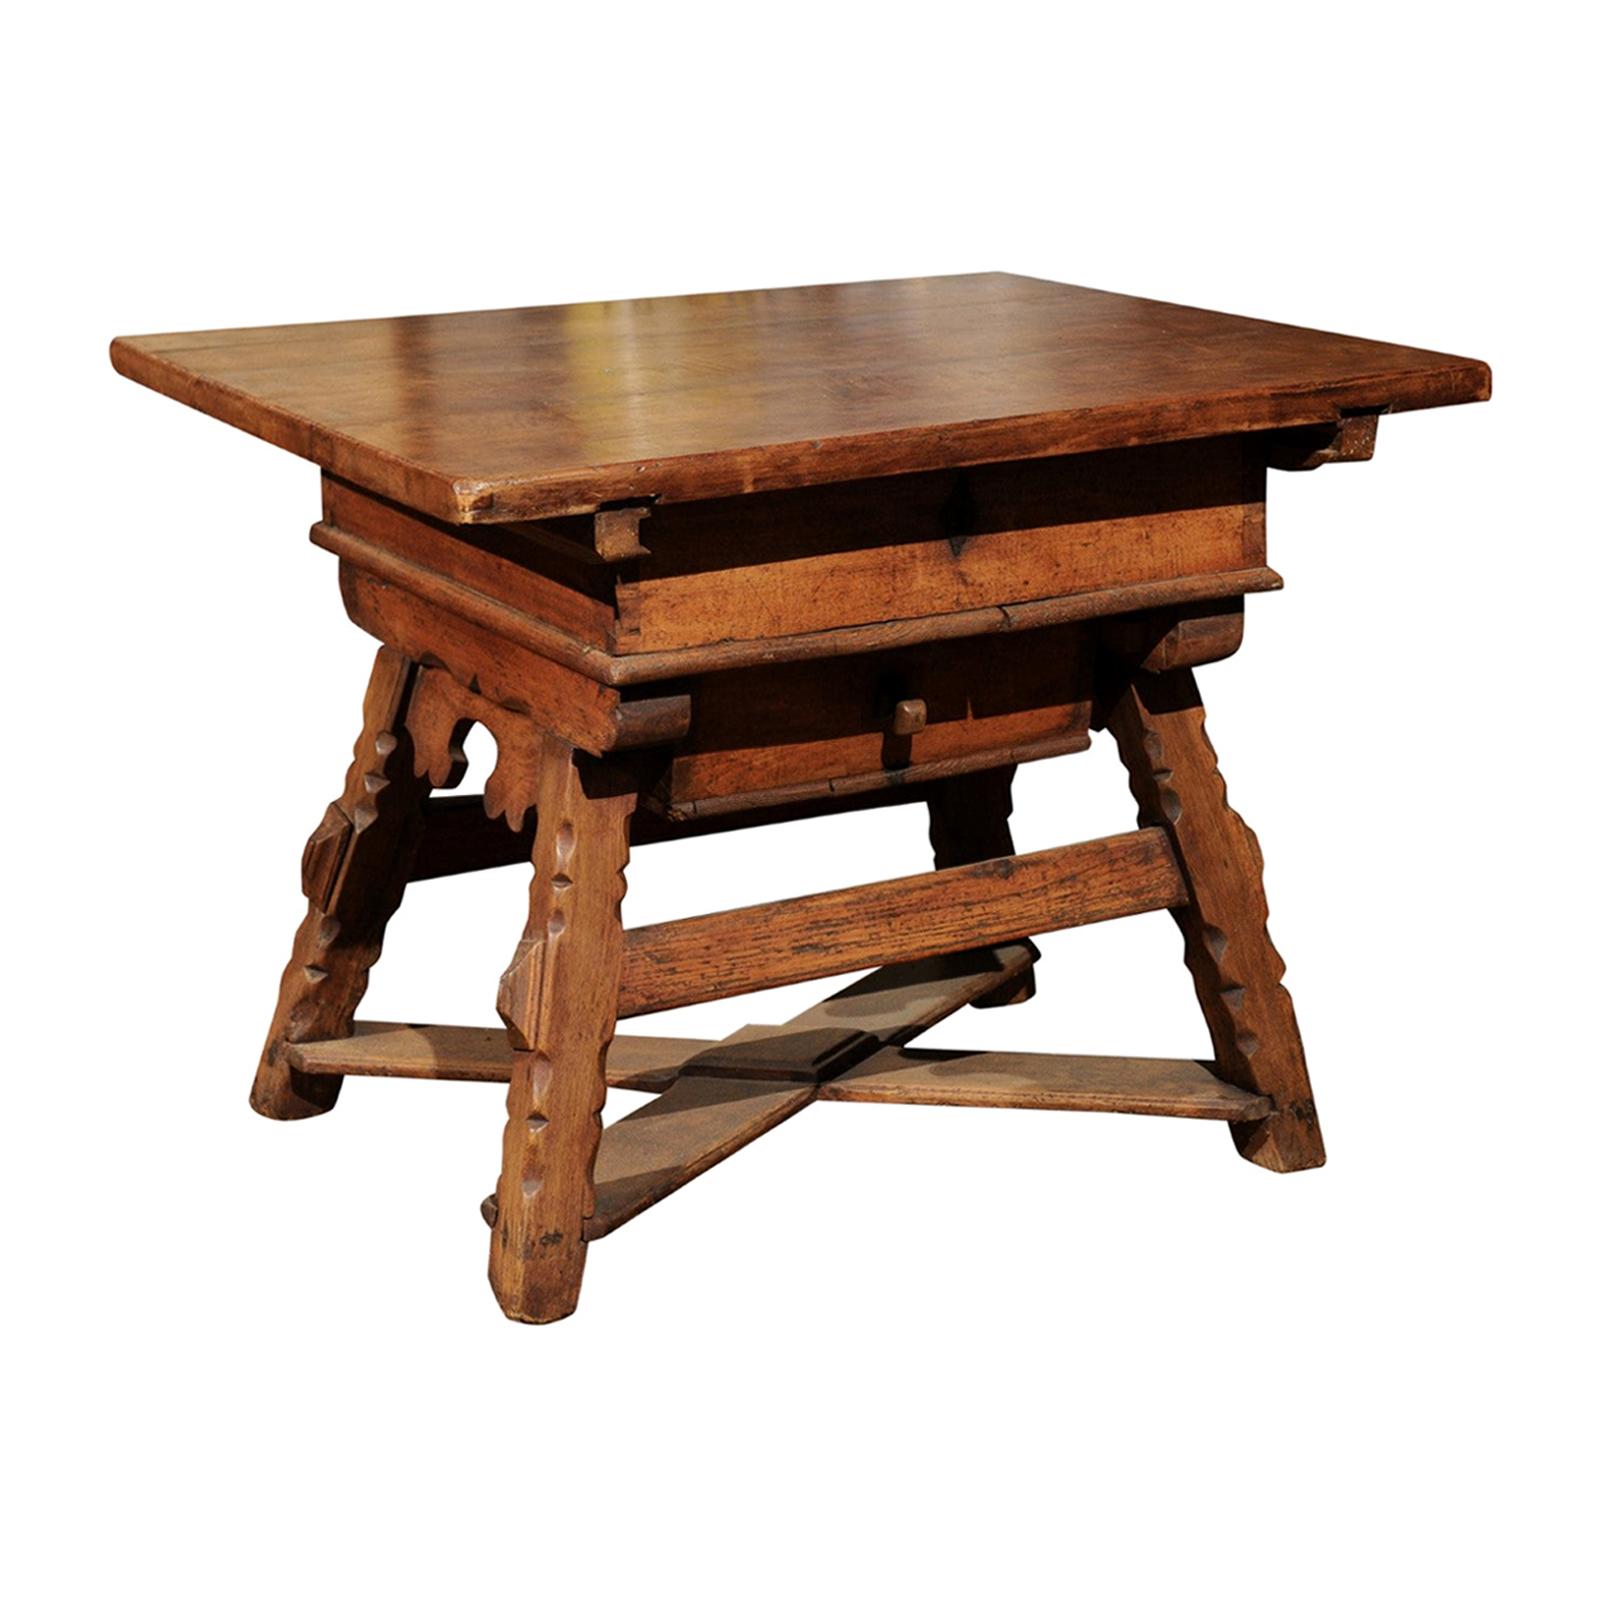 Swiss Walnut Center Table from the Alps, circa 1800 